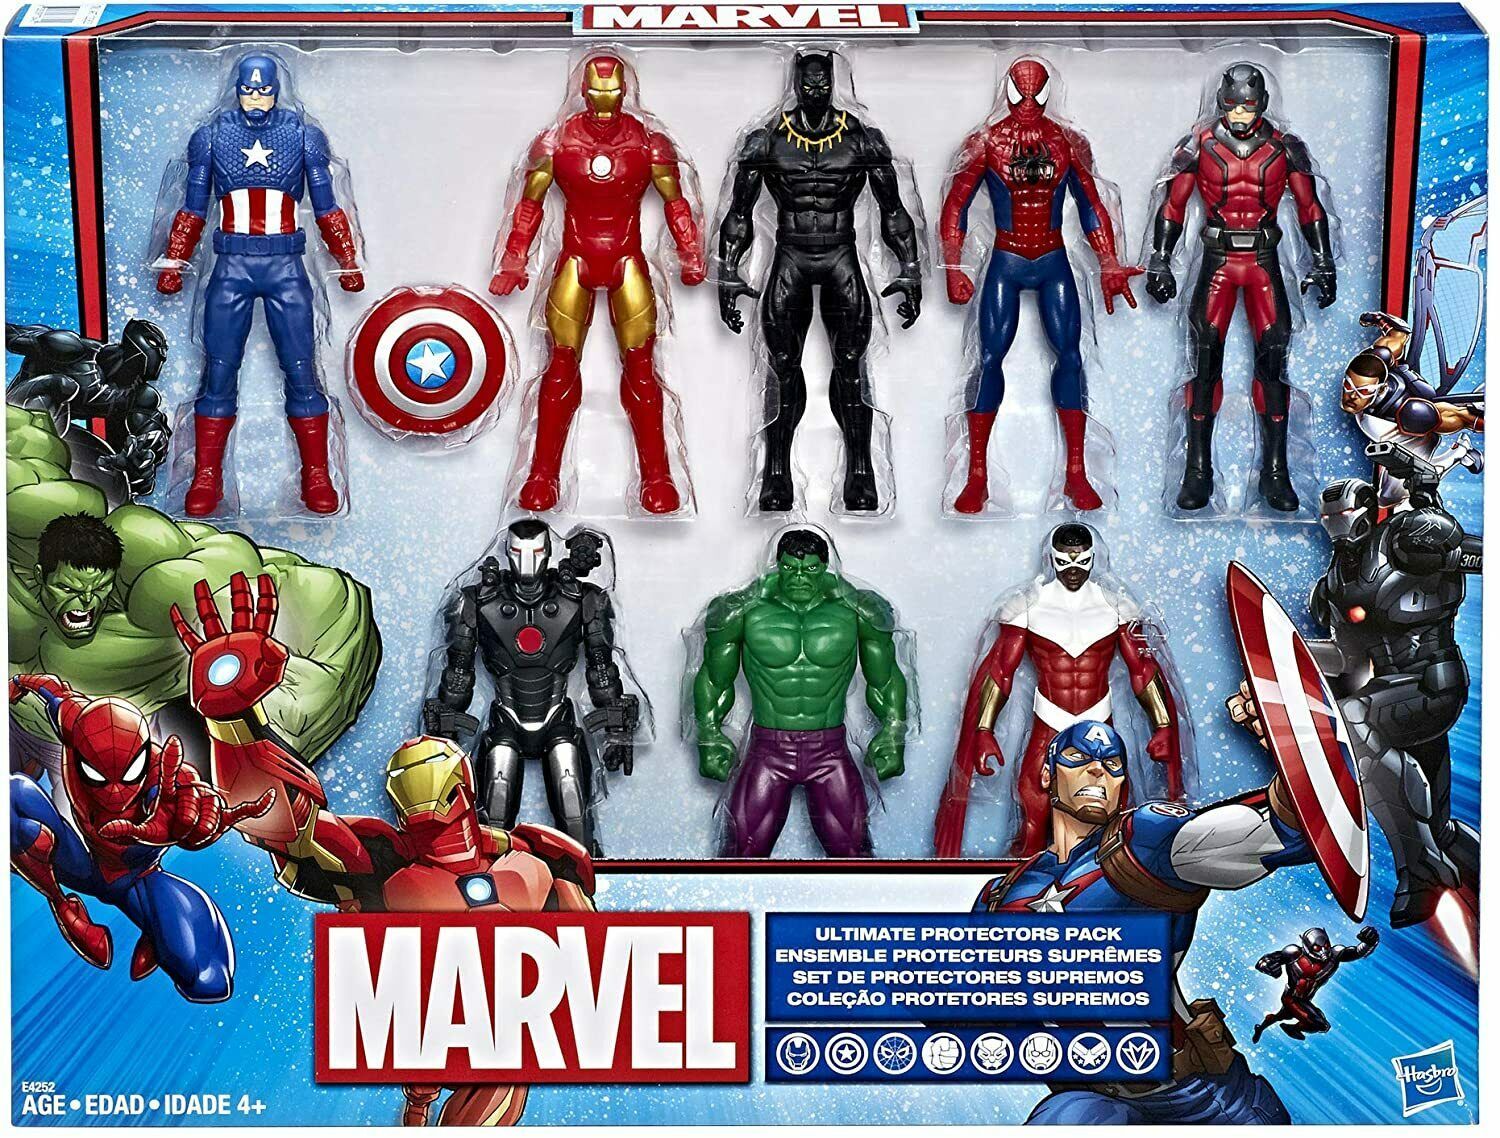 Marvel Avengers Action Figures set of 8 Iron Man Black Panther Captain America